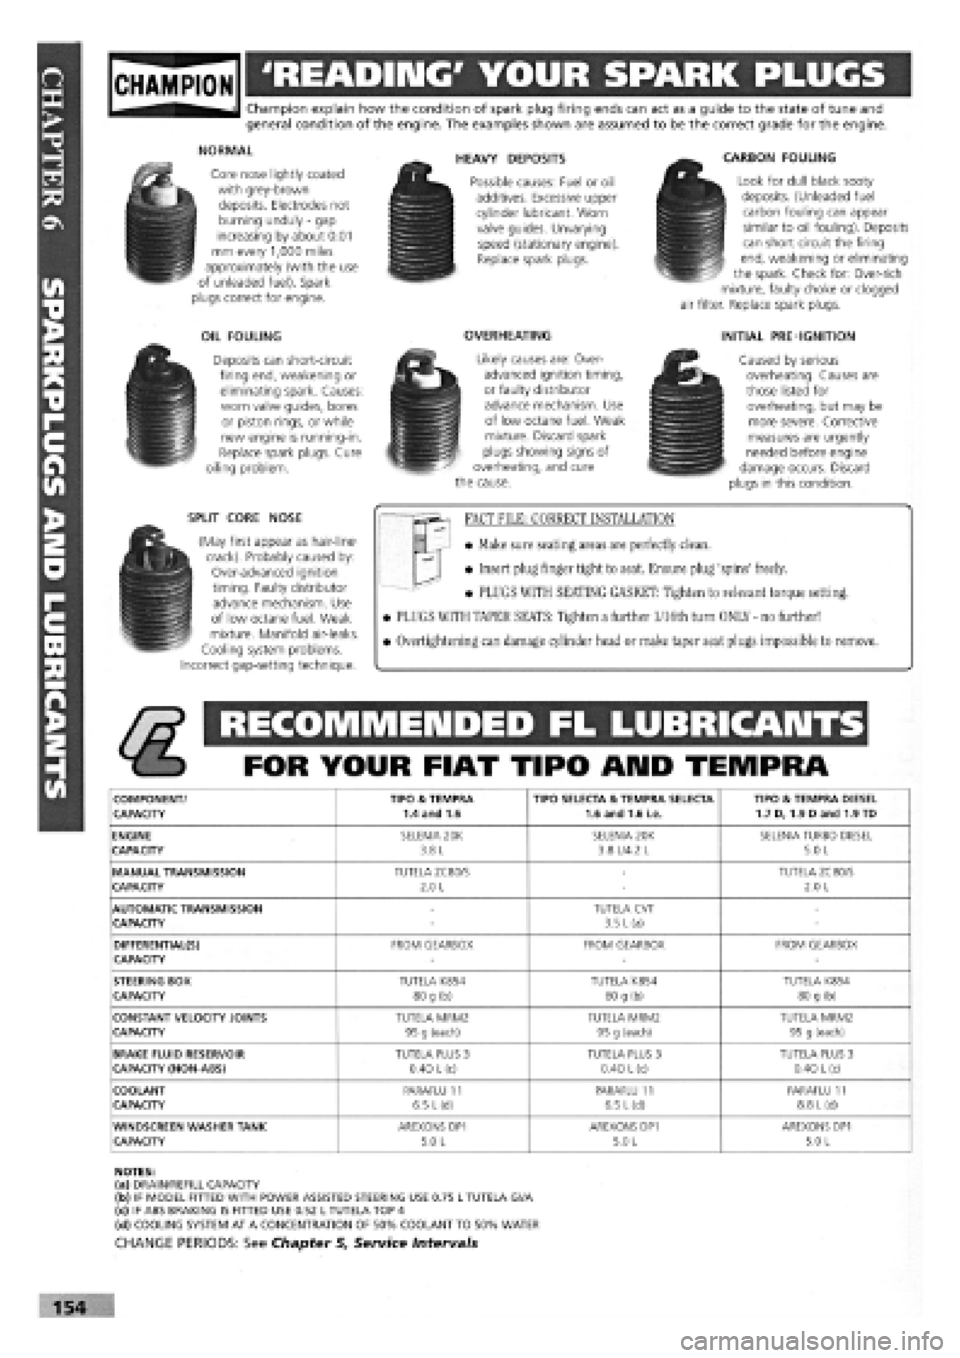 FIAT TEMPRA 1988  Service And Repair Manual 
gjpjgjjl READING YOUR SPARK PLUGS 
Champion explain how the condition of spark plug firing ends can act as a guide to the state of tune and general condition of the engine. The examples shown are a